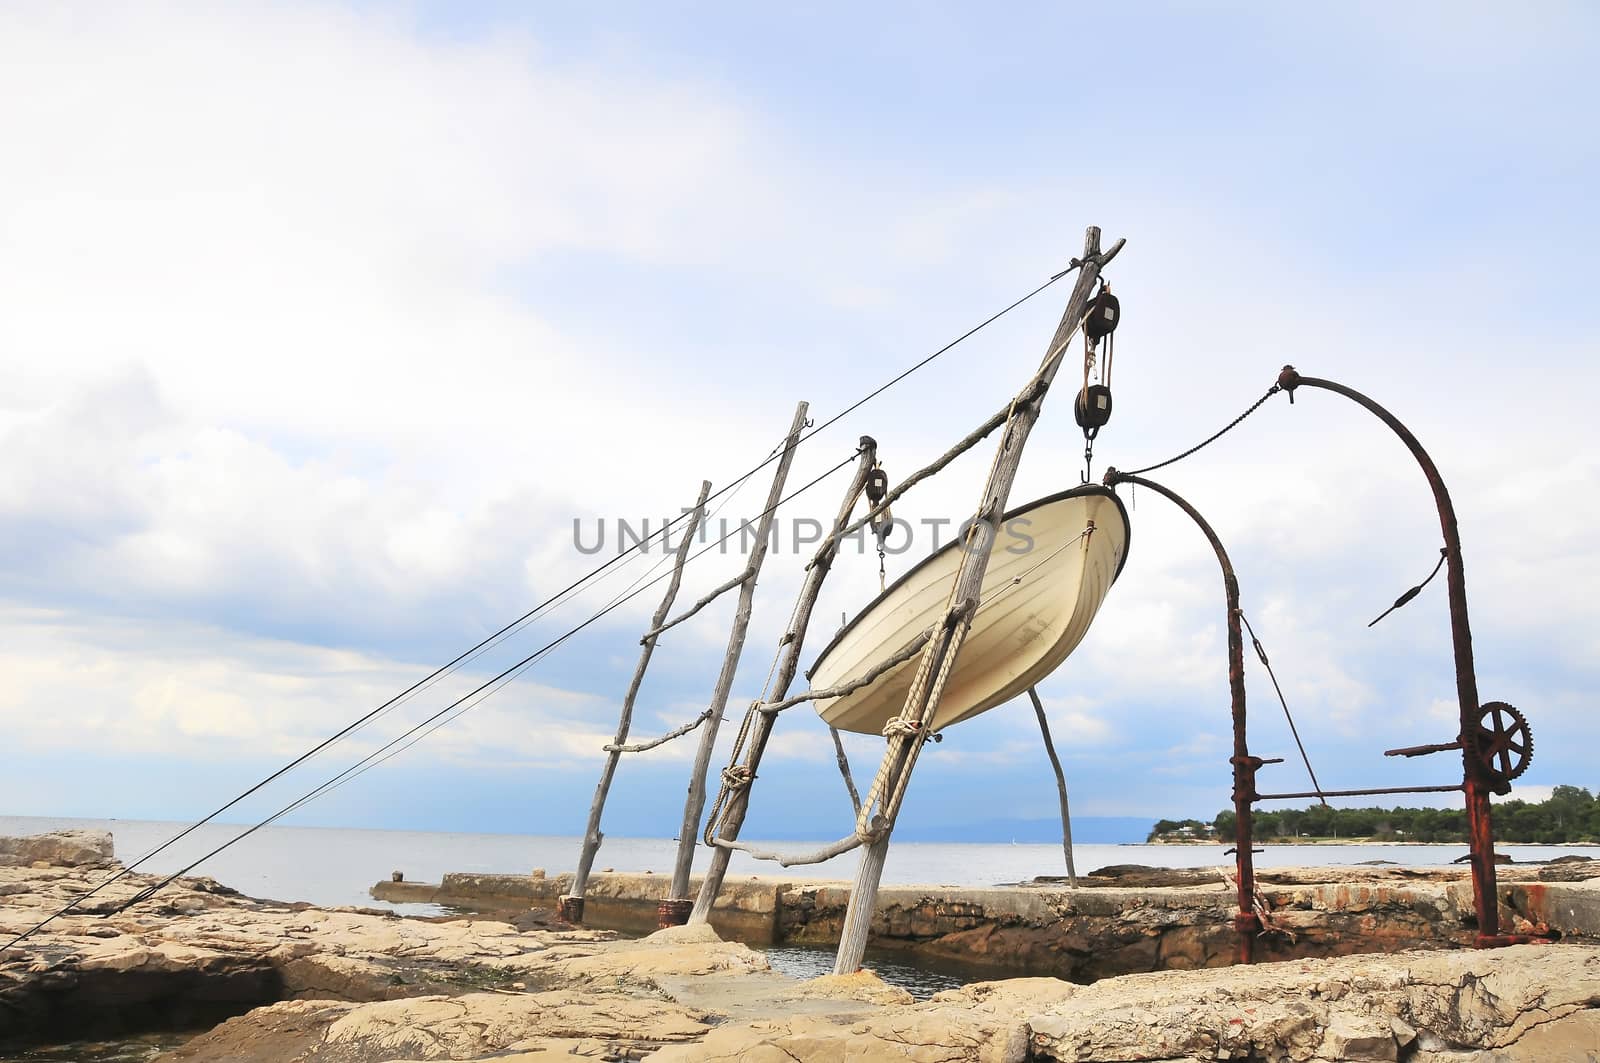 Small fishing boat hoisted on traditional crane by asafaric